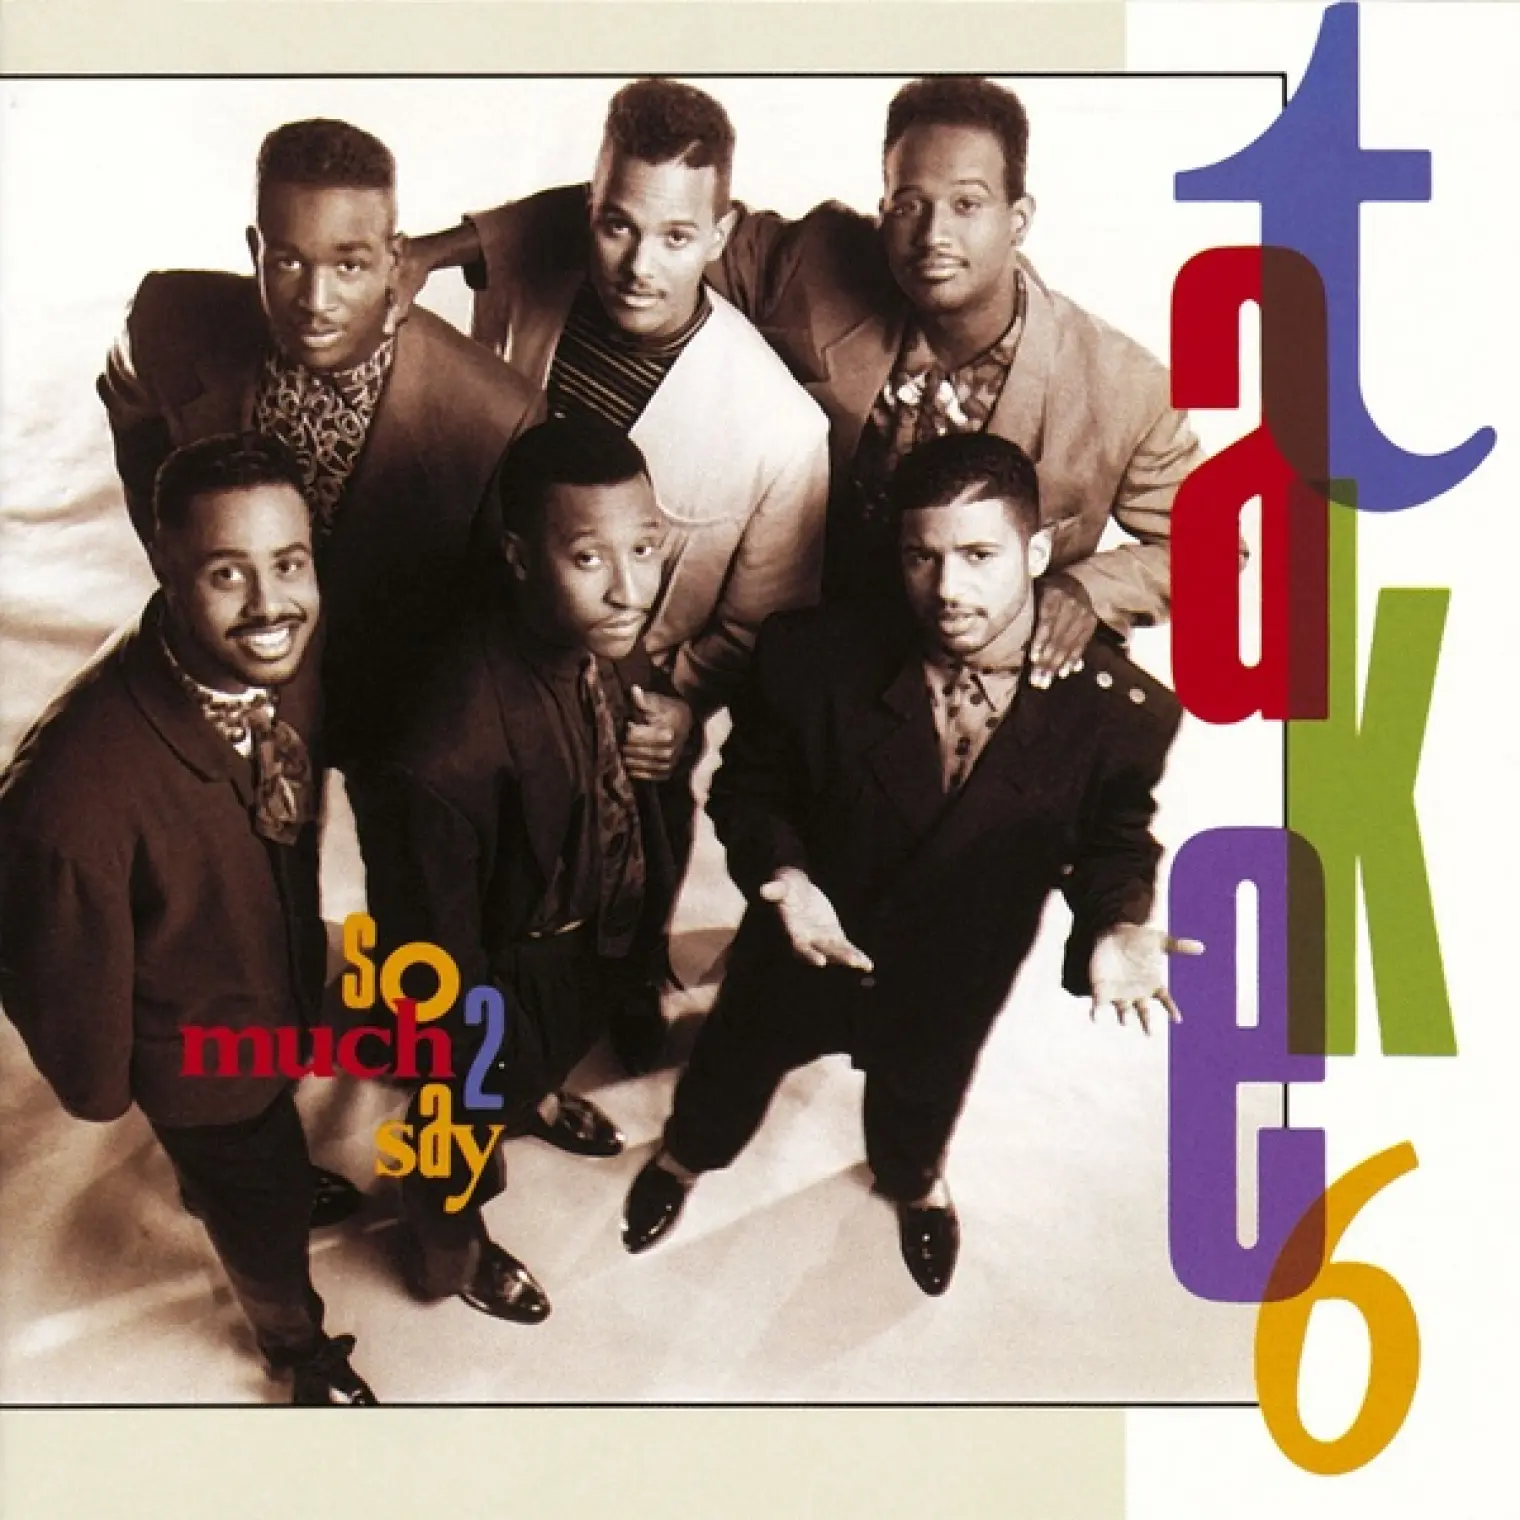 So Much 2 Say -  Take 6 